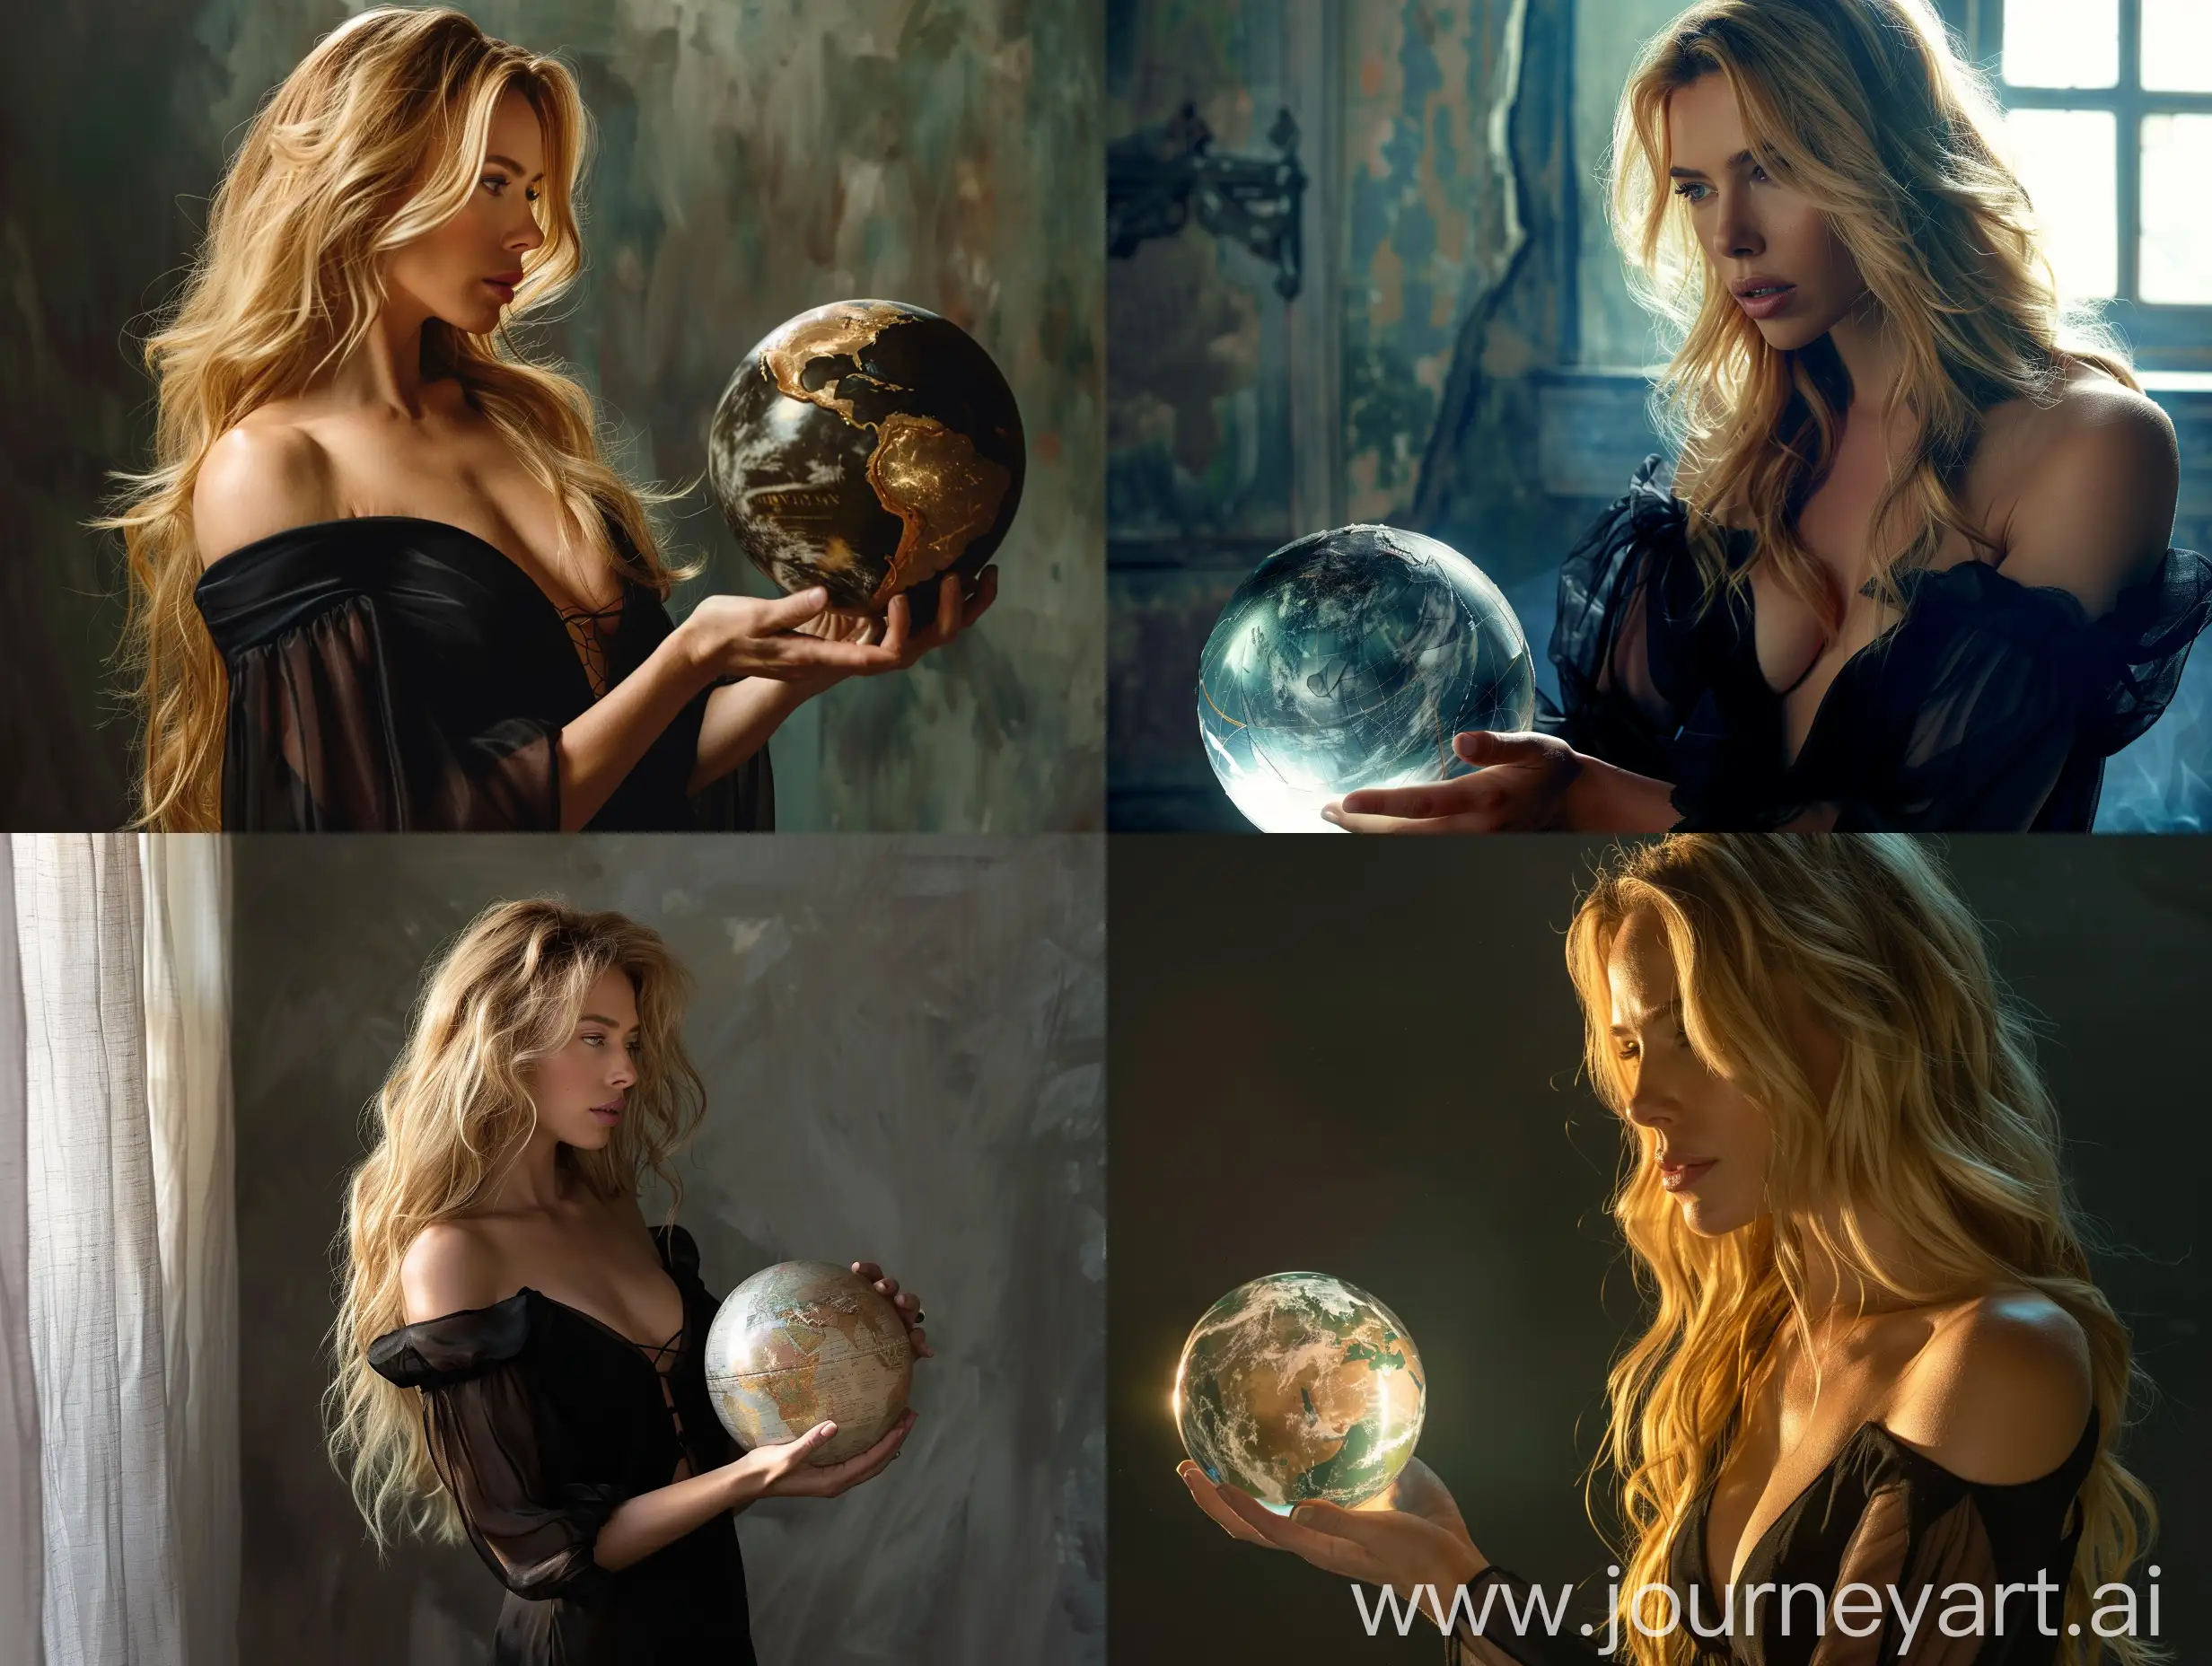 Scarlett Johansson with long blonde hair, in a black open-shoulder dress, 1000 years in the future, with a real globe in her hands looking at it, 8k